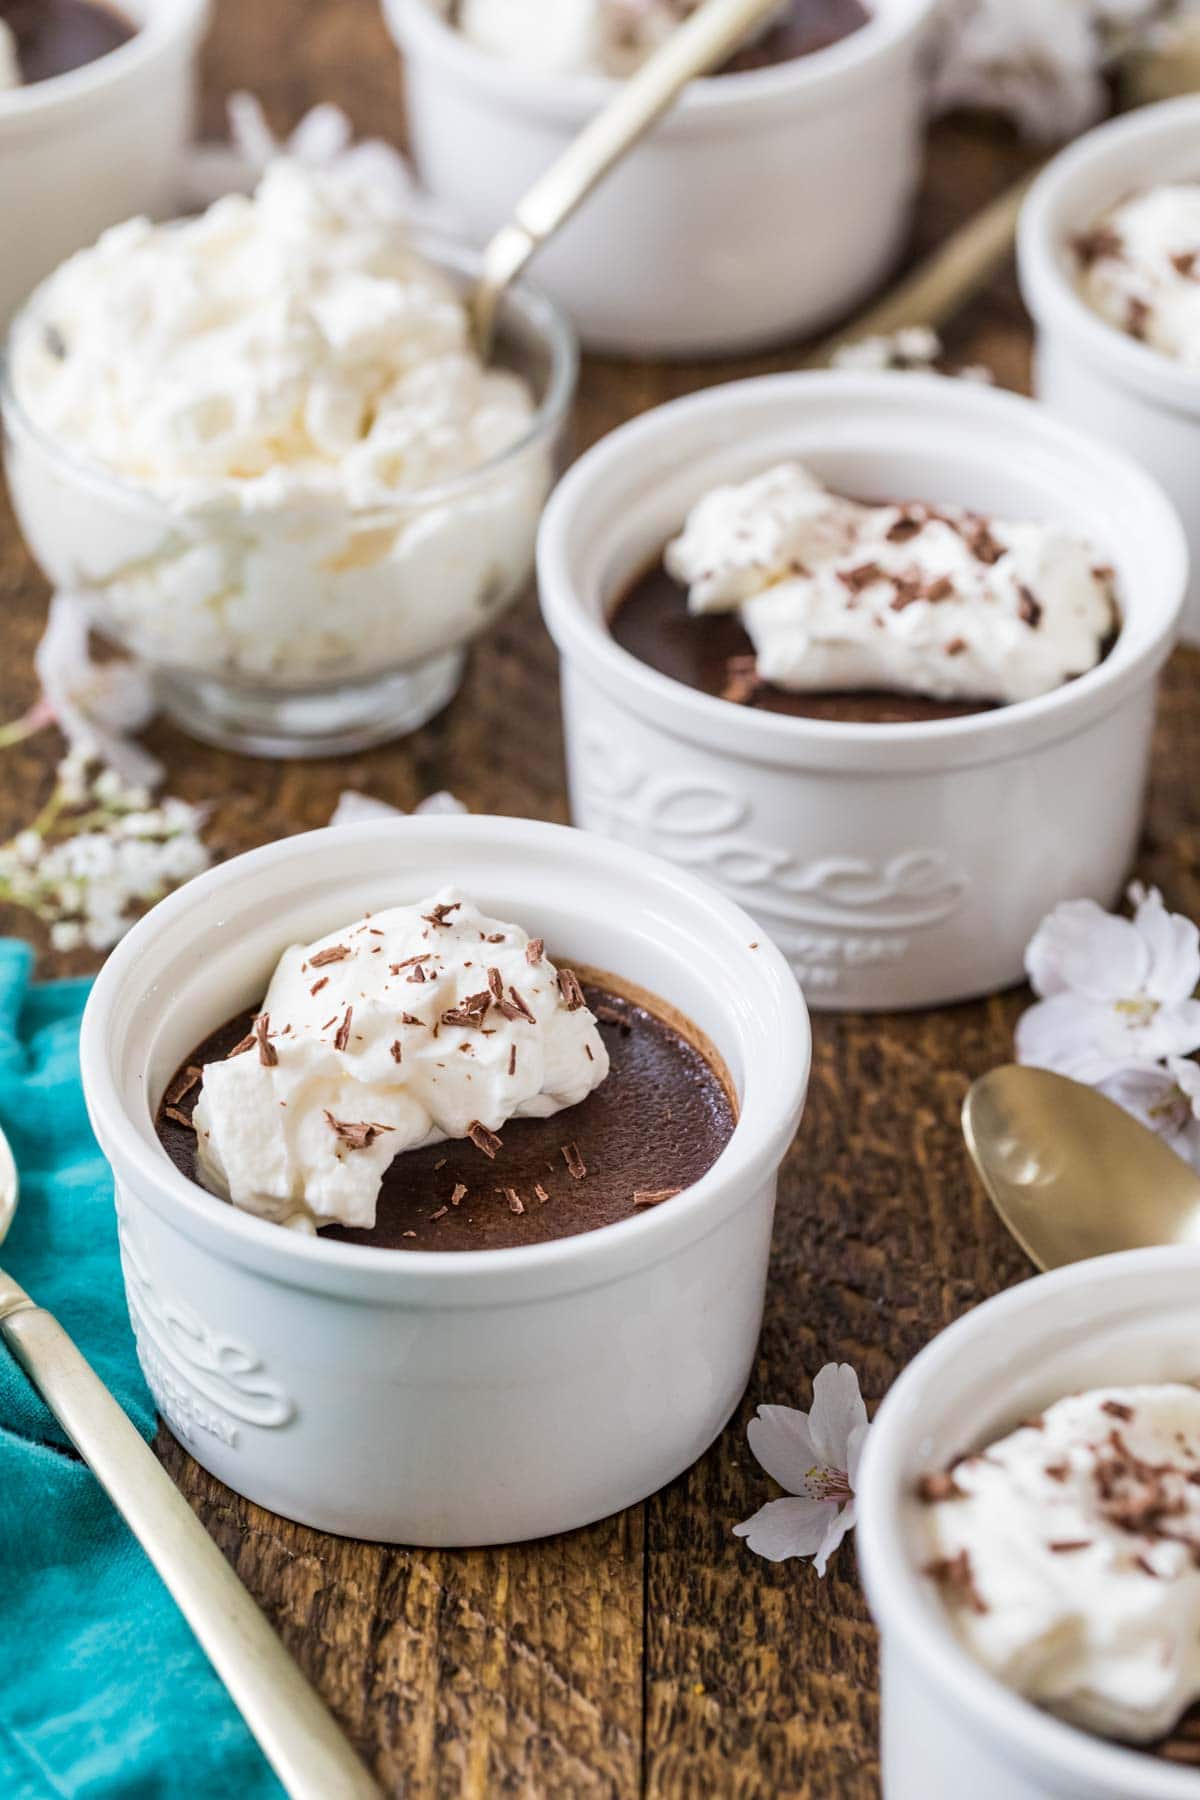 Ramekins of pot de creme topped with whipped cream and chocolate shavings.